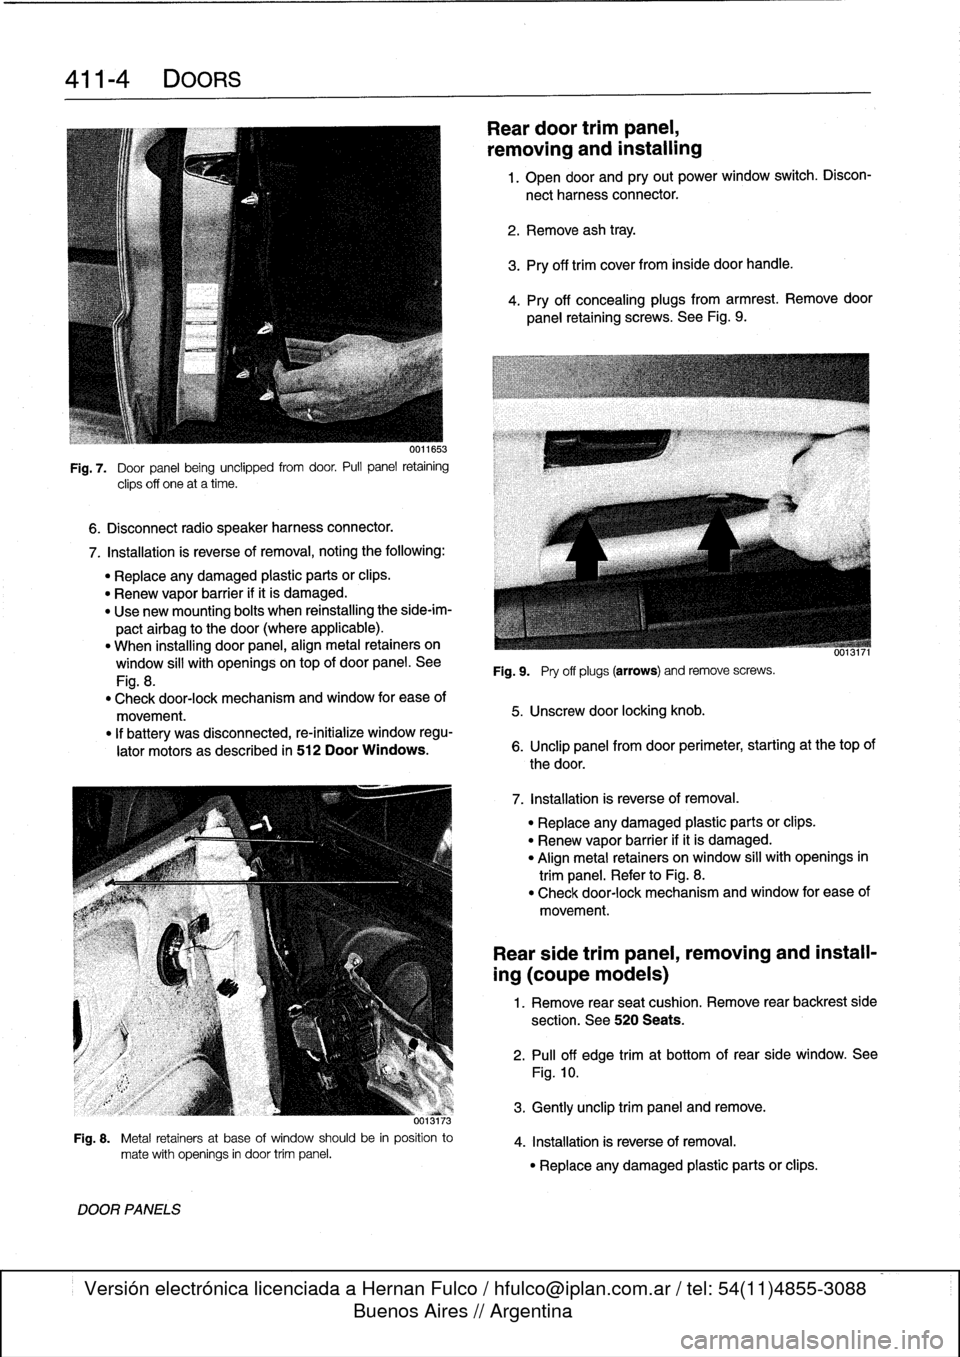 BMW 328i 1997 E36 Workshop Manual 
411-
4
DOORS

6
.
Disconnect
radio
speaker
harness
connector
.

Fig
.
7
.

	

Door
panel
being
unclipped
from
door
.
Pull
panel
retaining

clips
off
one
at
a
time
.

7
.
Installation
is
reverse
of
re